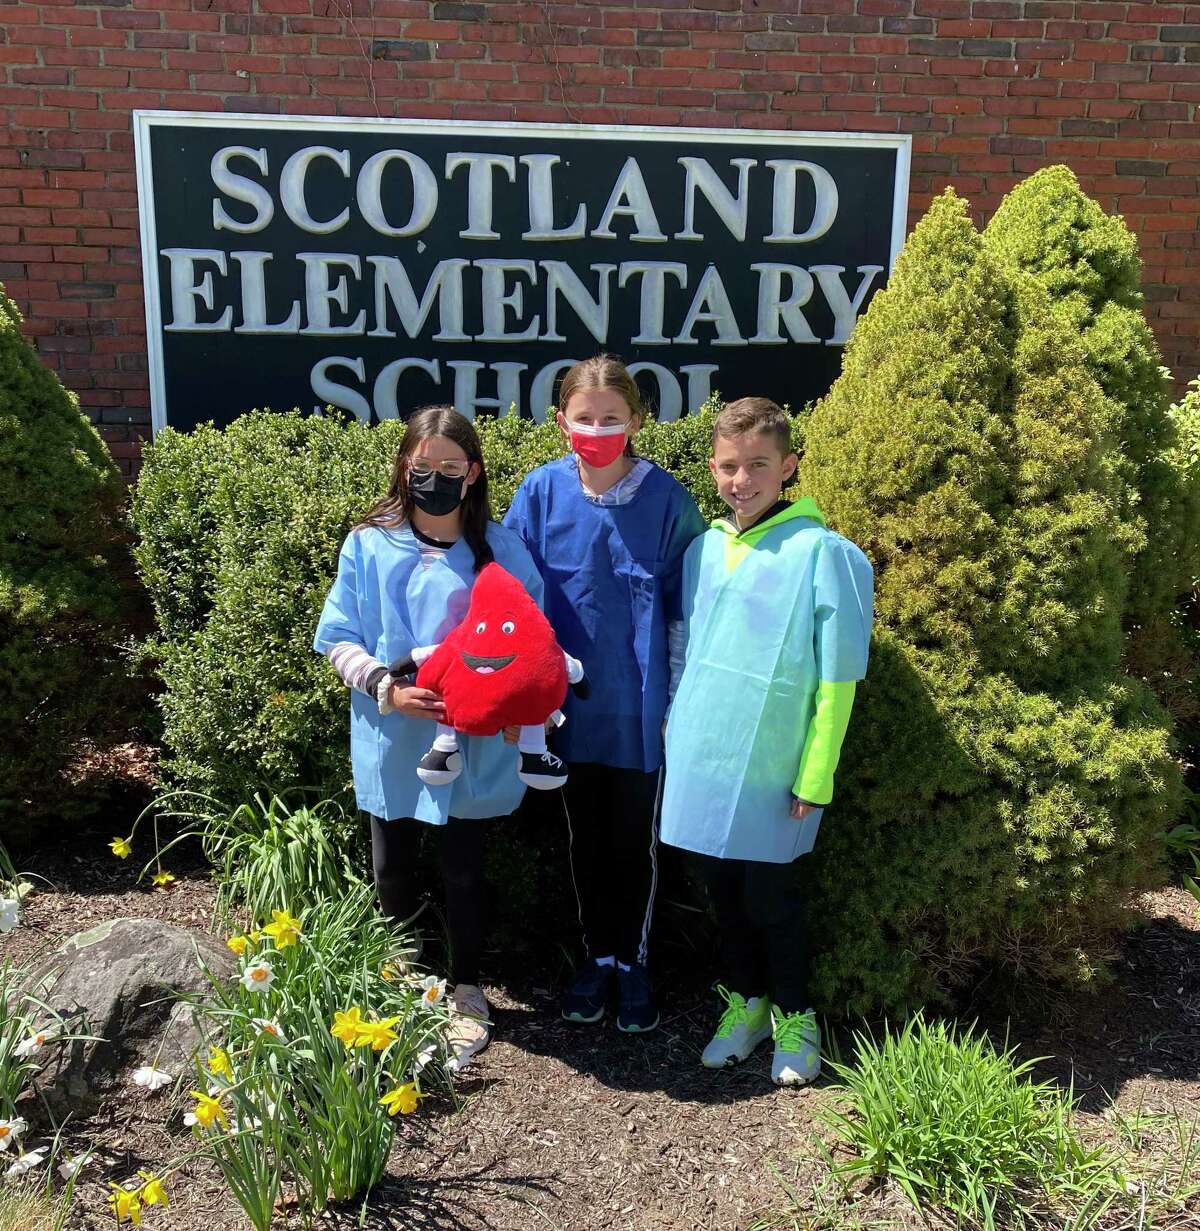 Scotland Elementary School and The Boys & Girls Club of Ridgefield will sponsor a blood donation event from 4 to 8:30 p.m. Thursday, May 19. From left to right: Ella Caron, Katelyn Doyle, Sean Sambus